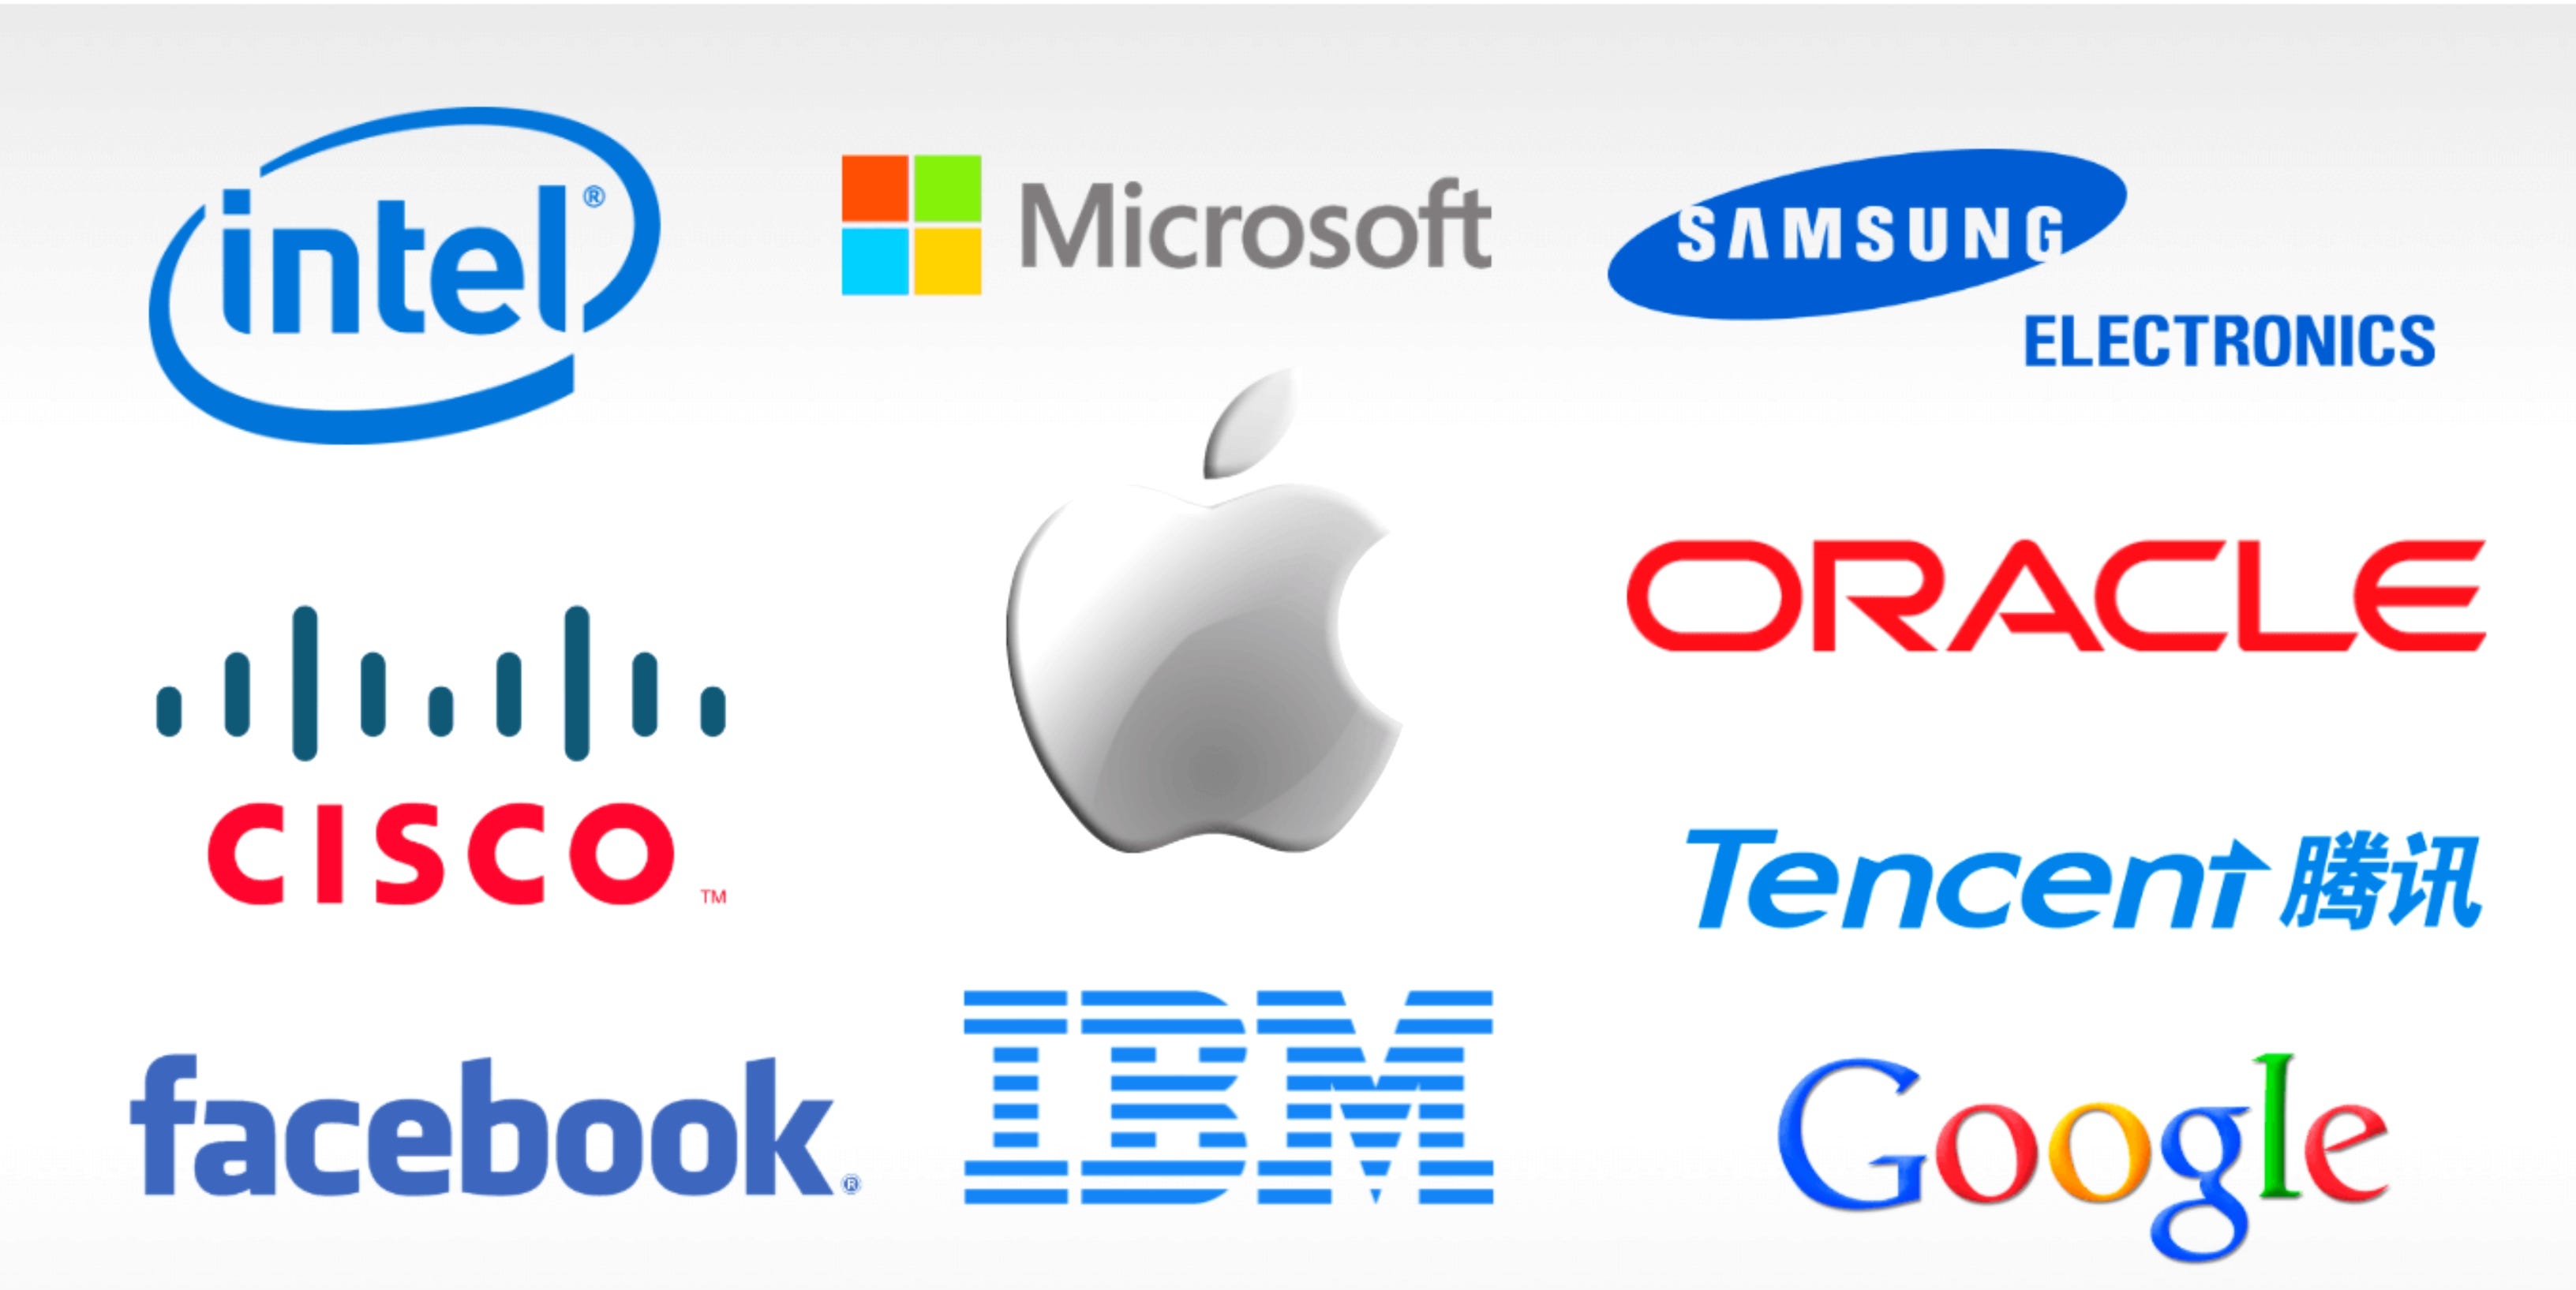 Major Electronics and Software Companies